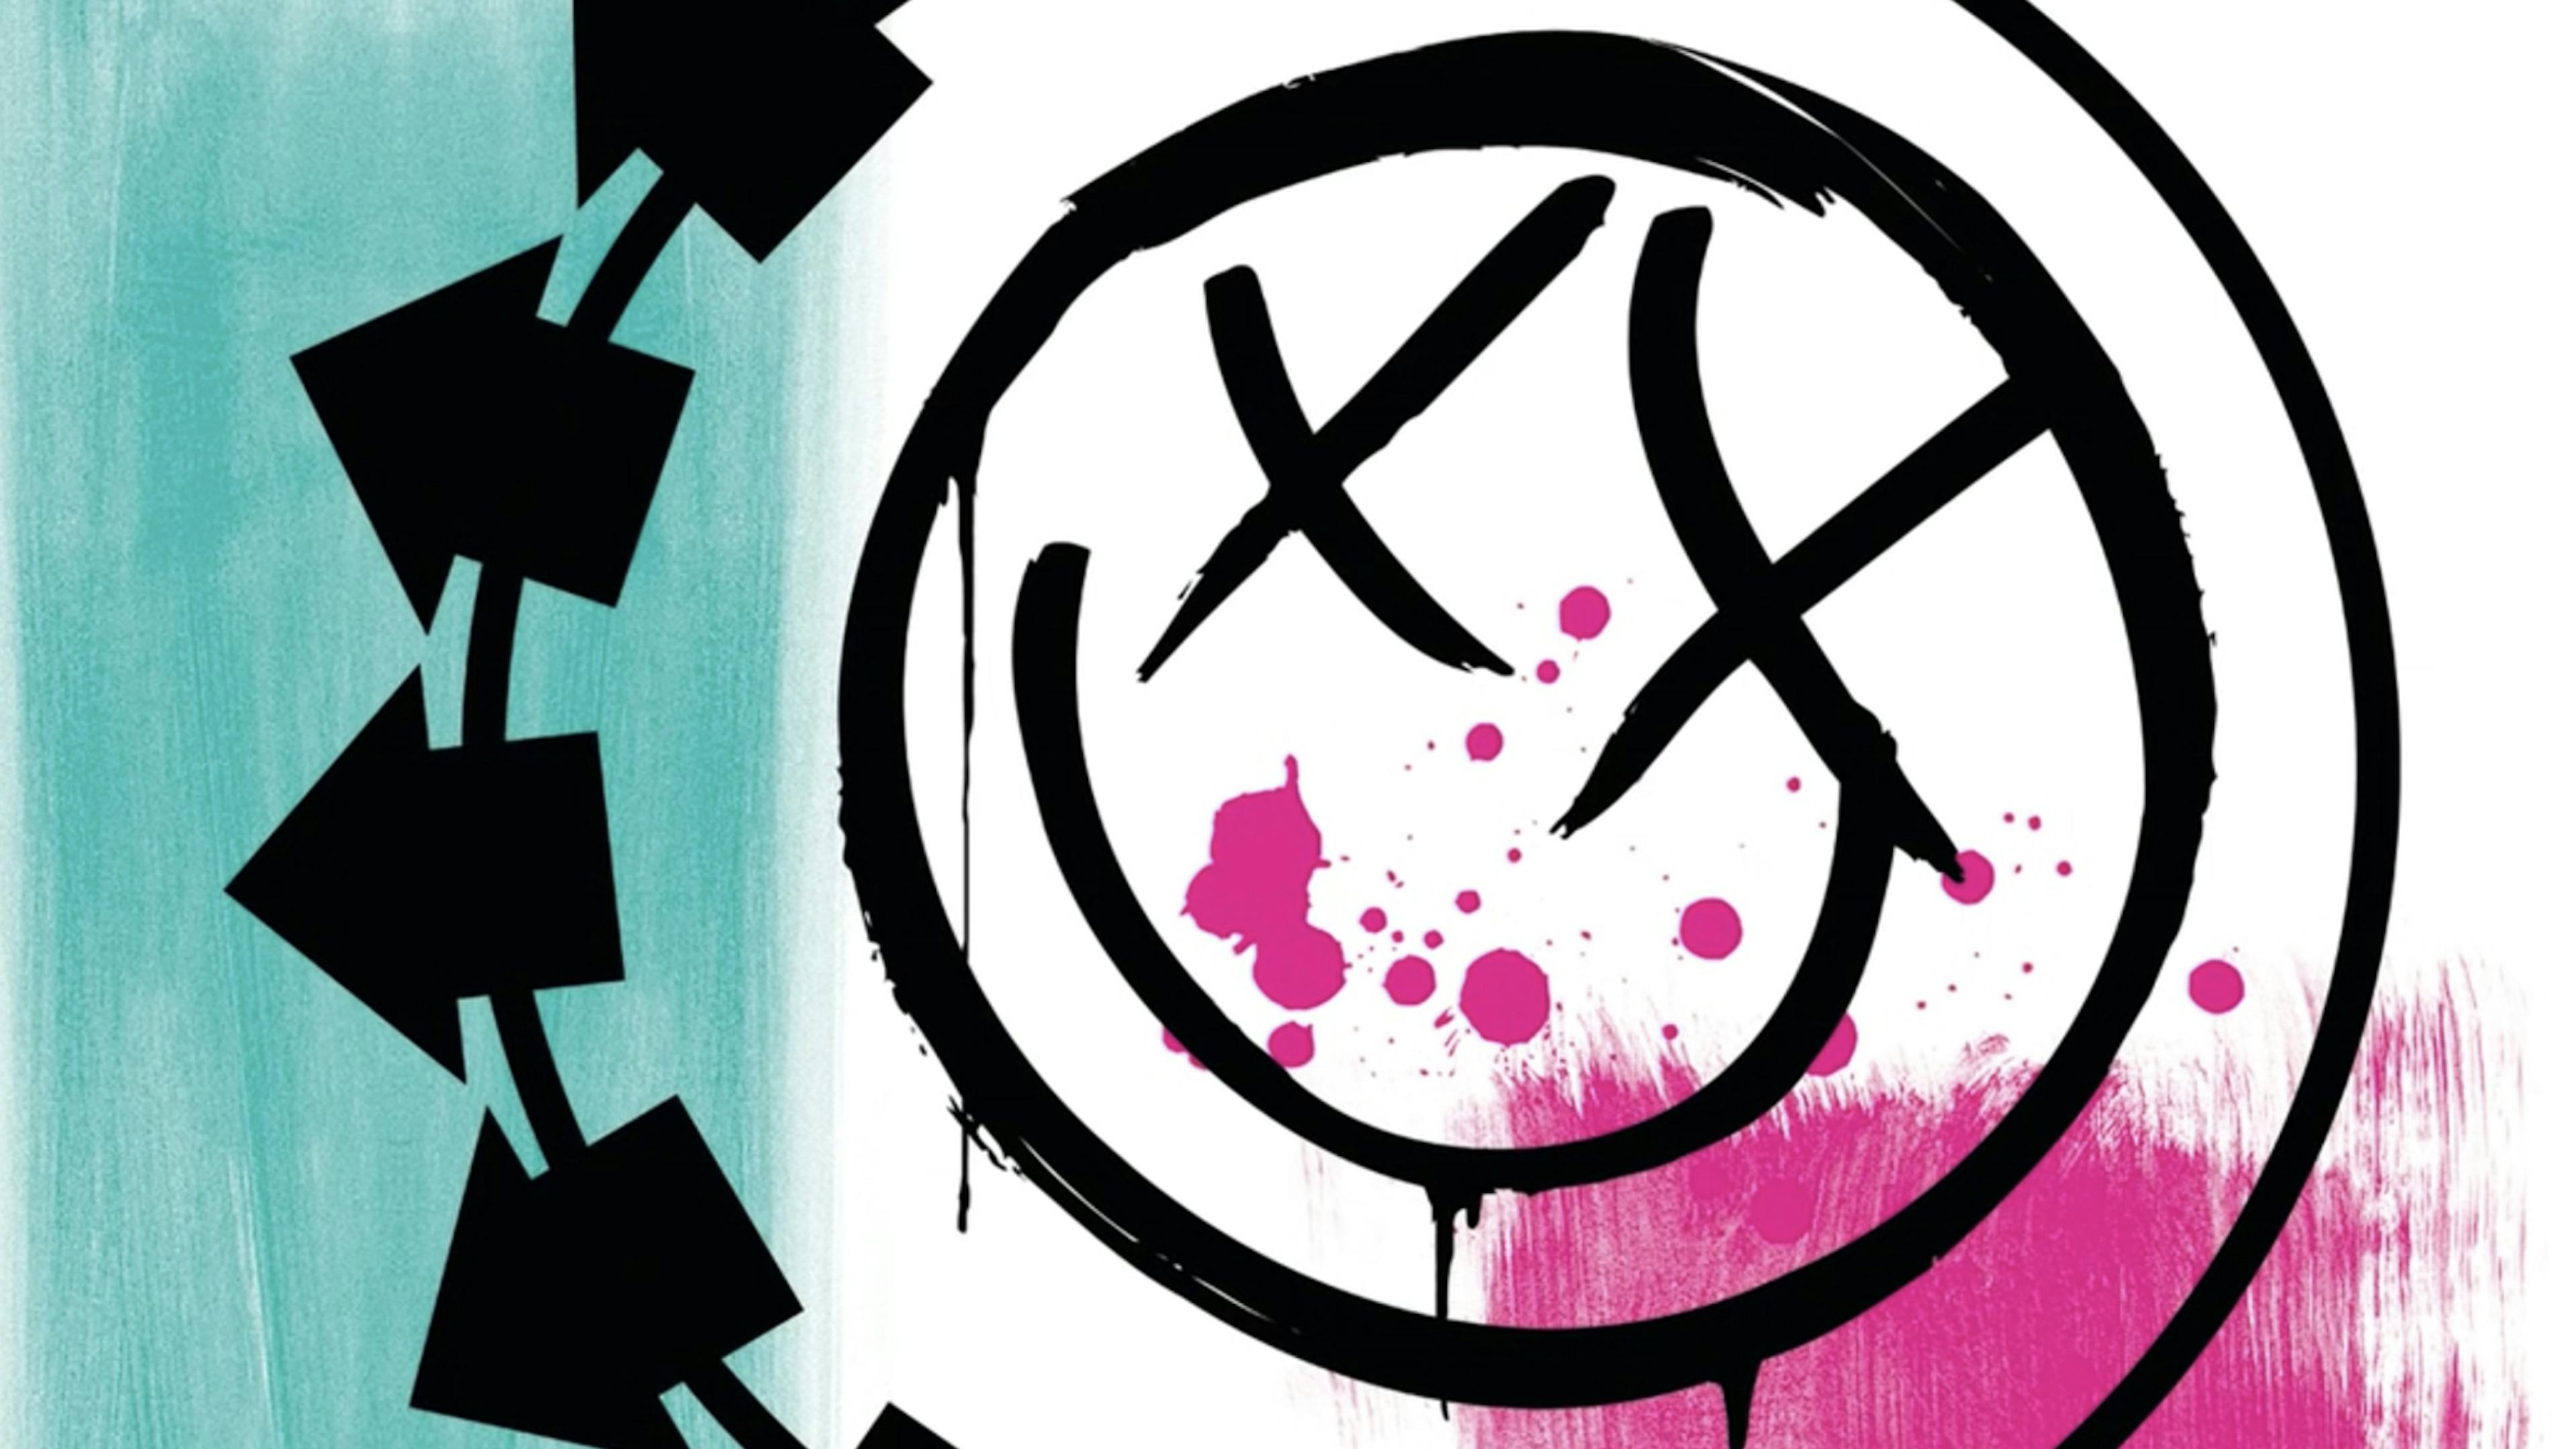 14 things blink-182’s Untitled album taught us